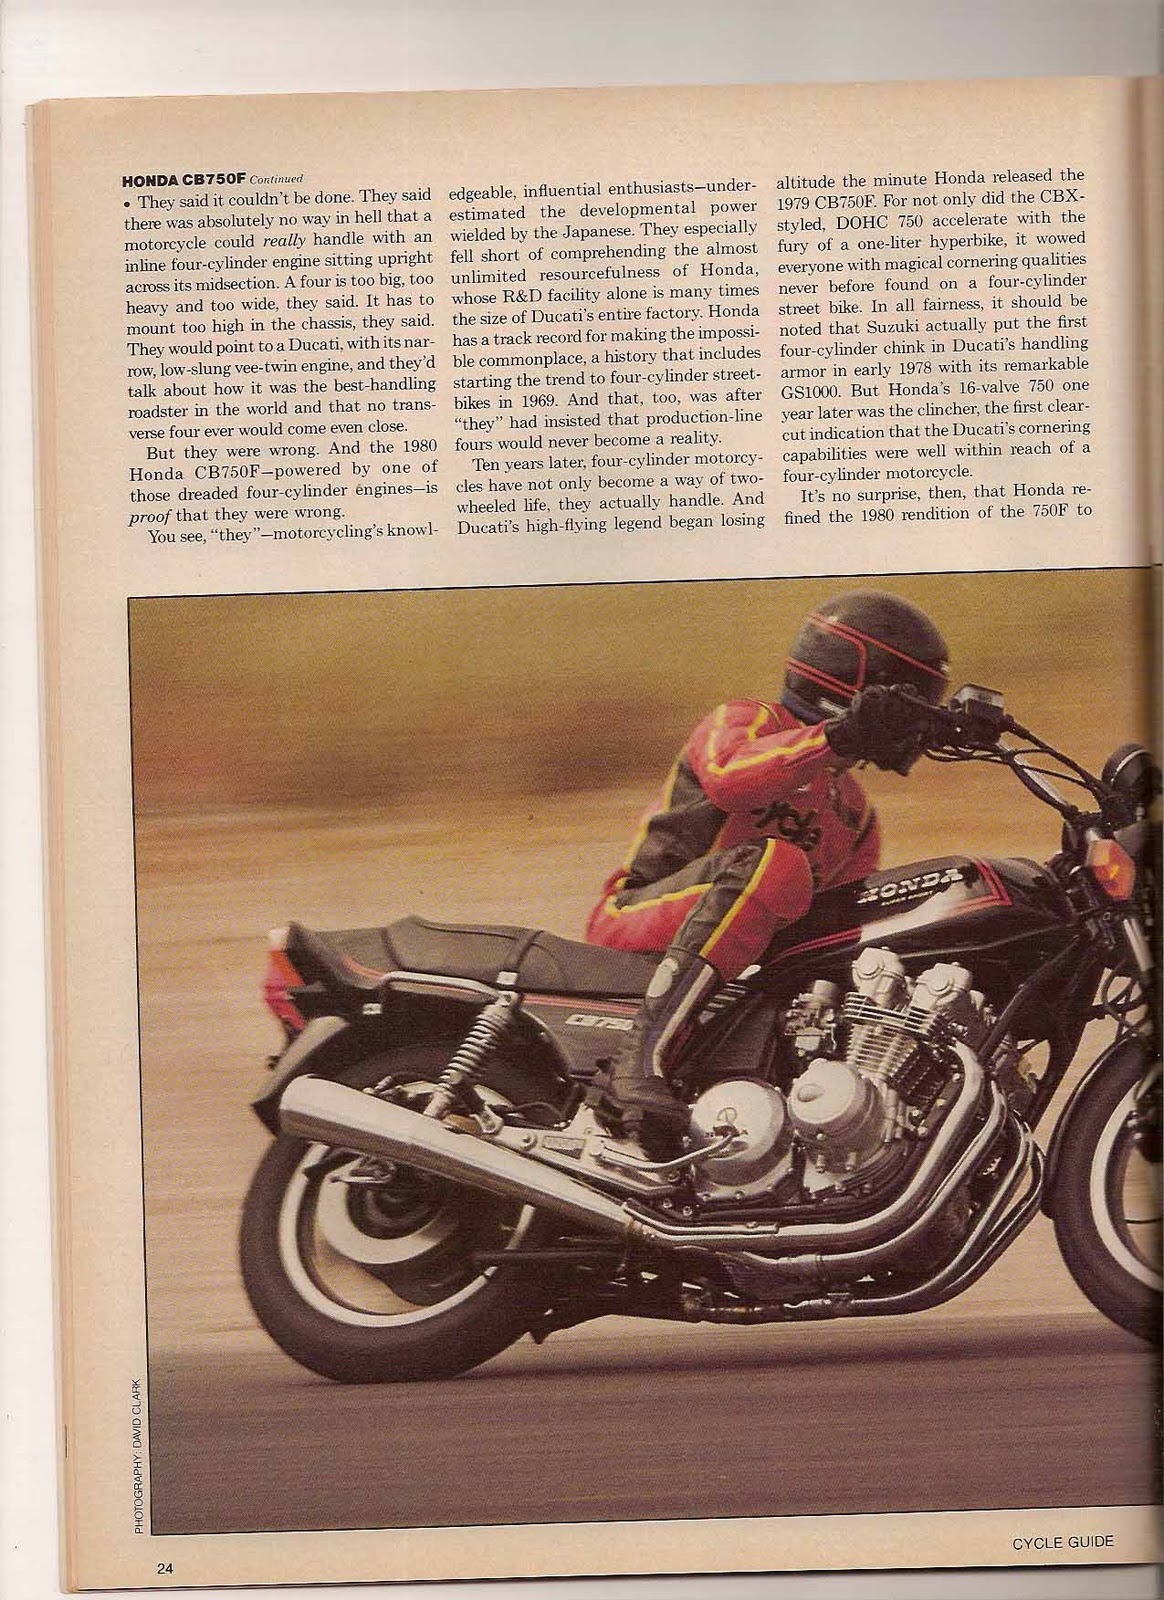 Cycle Guide Magazine  From The Cycle Guide Archives  The Day Honda